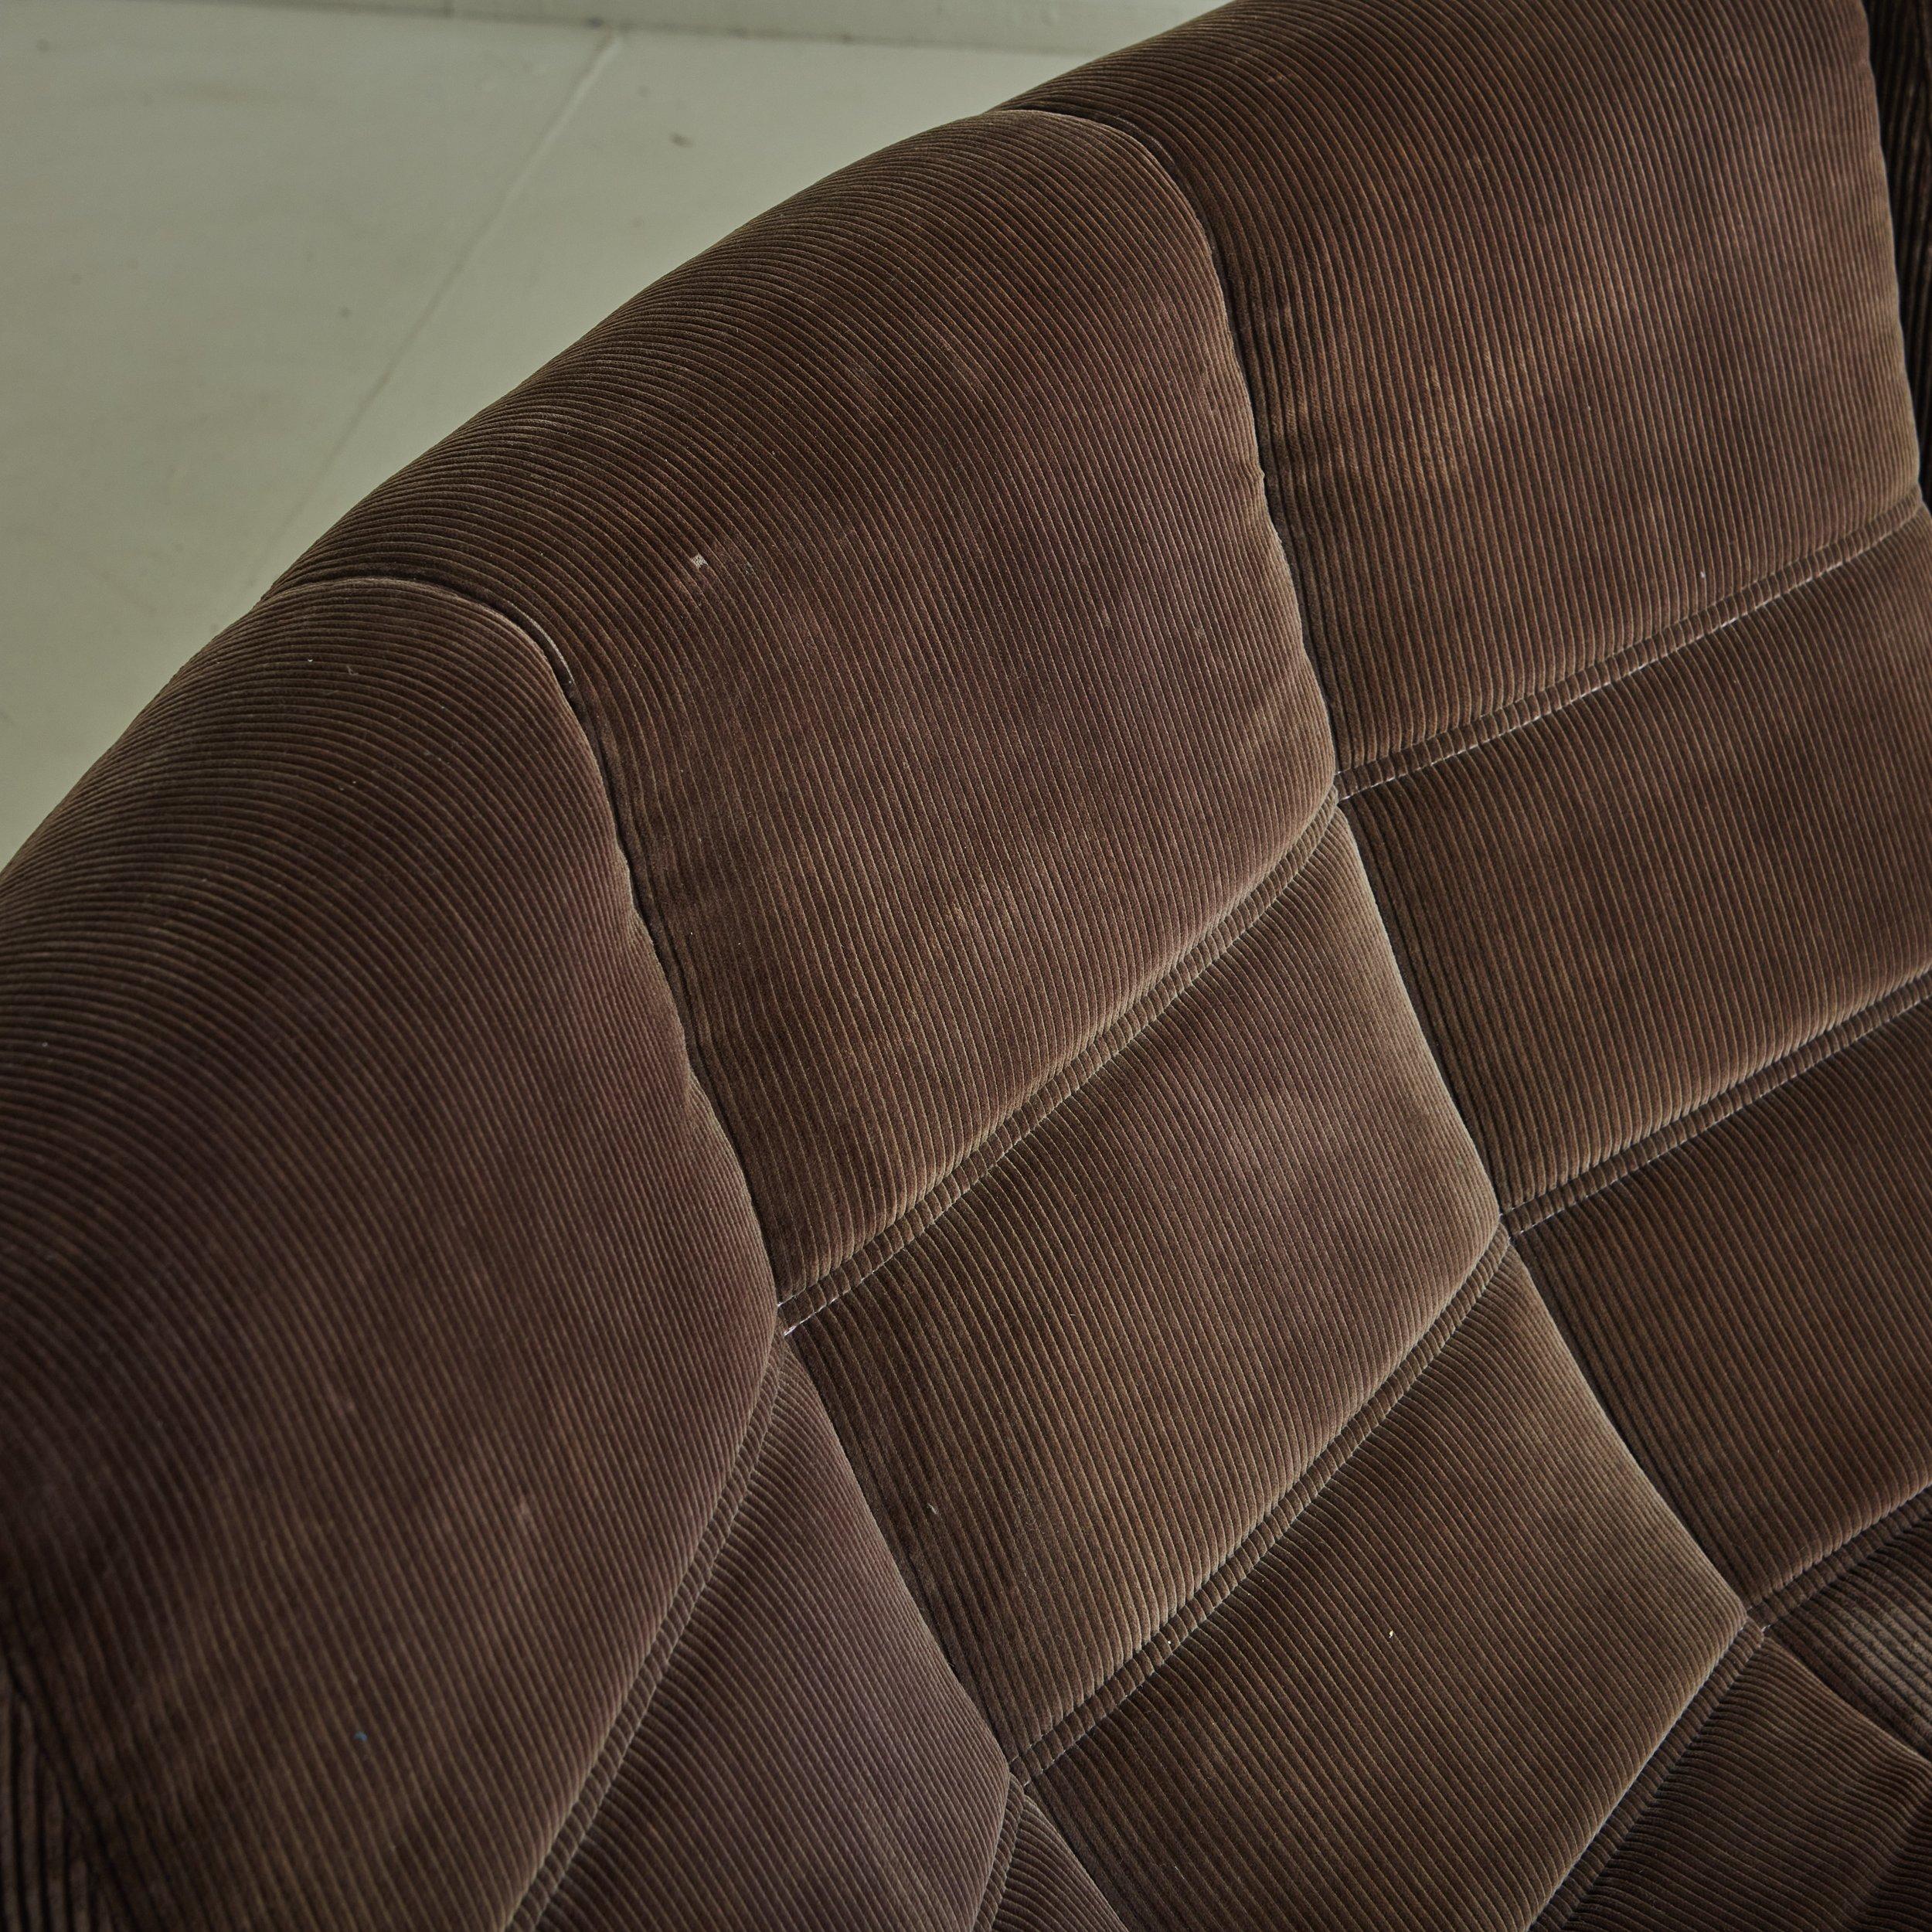 2-Piece 'Gilda' Sofa in Brown Corduroy by Michel Ducaroy for Ligne Roset, France In Fair Condition For Sale In Chicago, IL